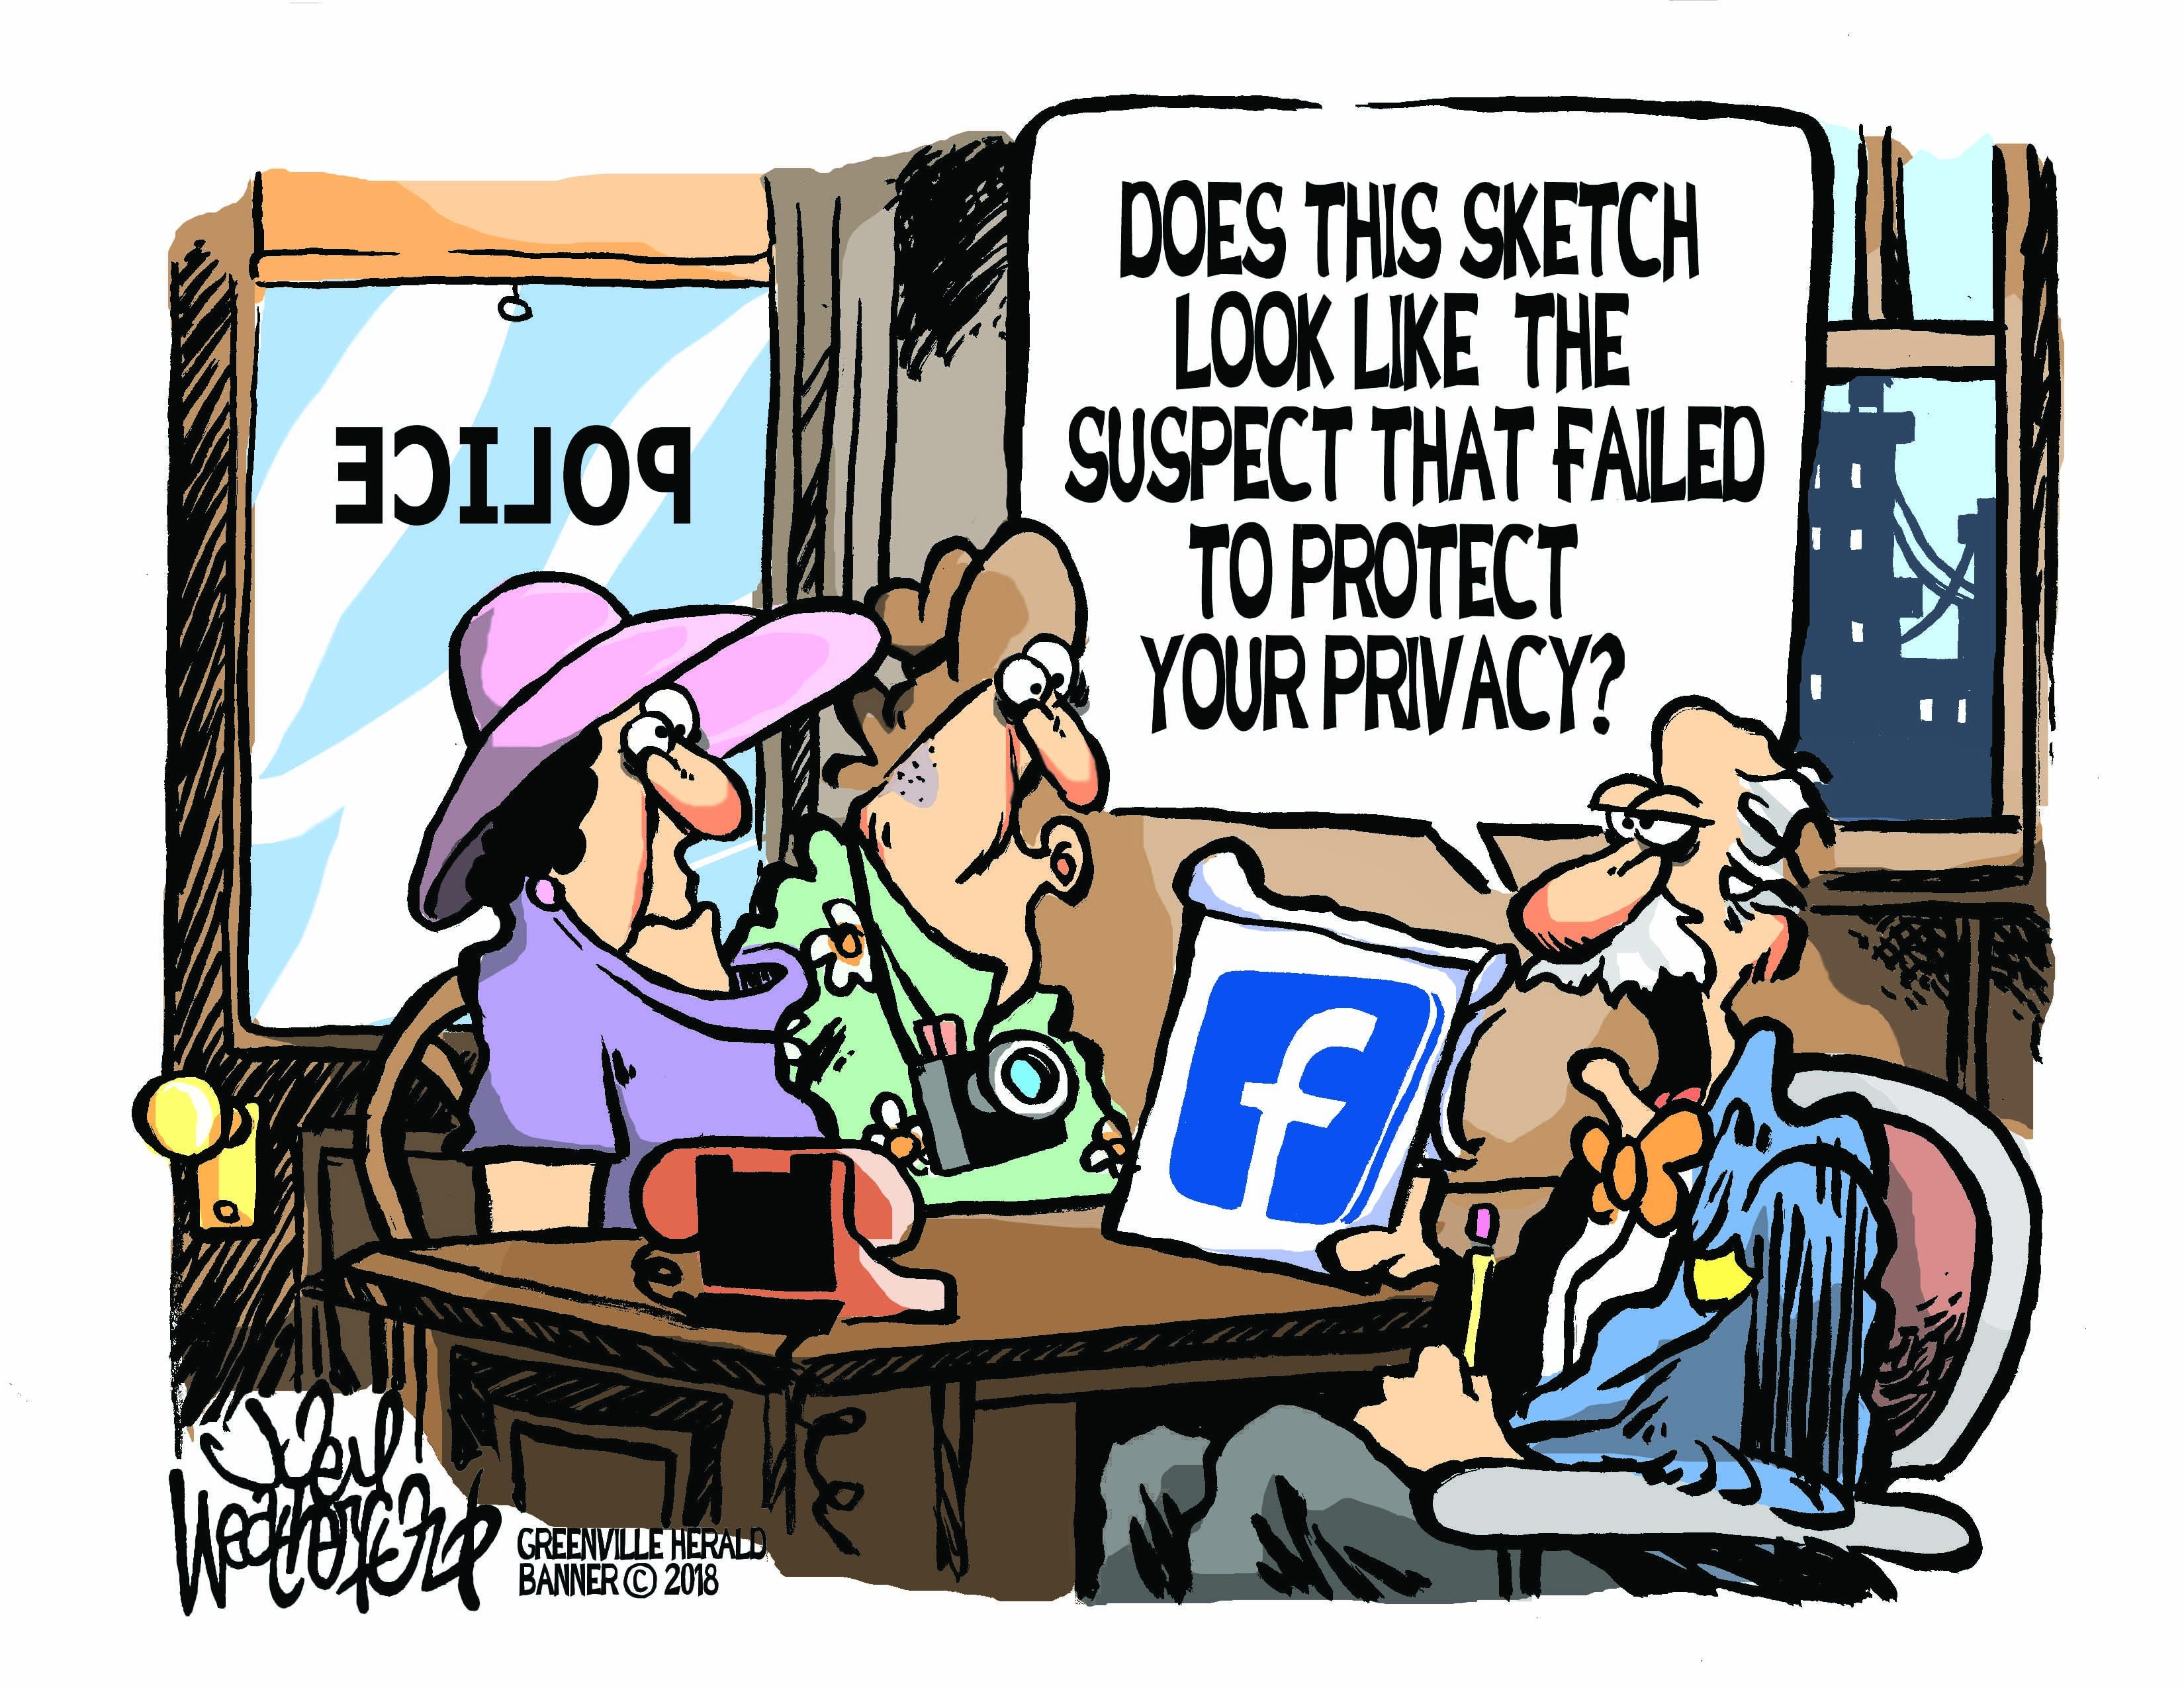 Weatherford cartoon: Privacy protection